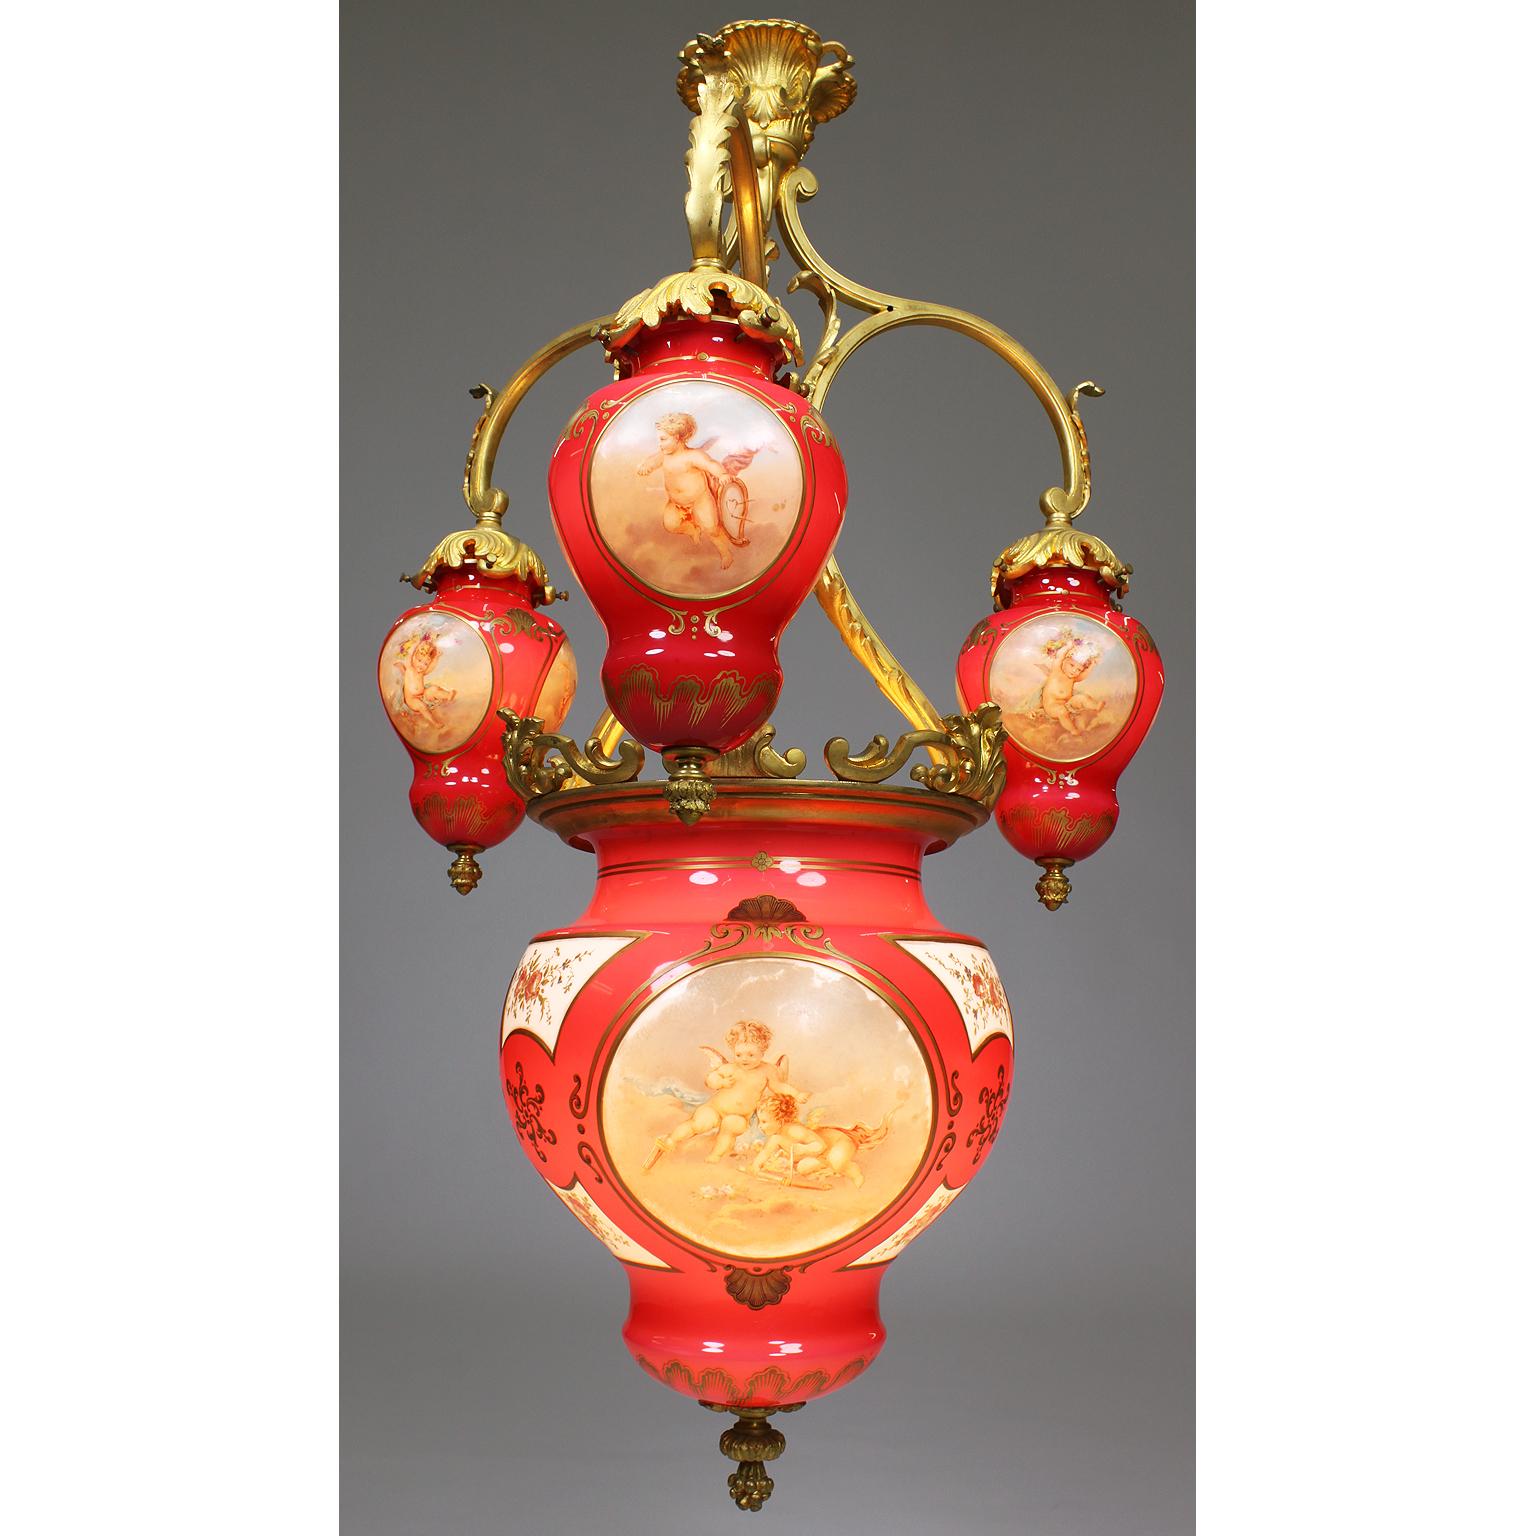 A very fine and rare French belle époque Baccarat opaline glass and gilt bronze six-light whimsical hanging lantern, chandelier. The finely chased three-arm gilt bronze frame, each arm surmounted with a pear-shaped hand painted shade decorated with